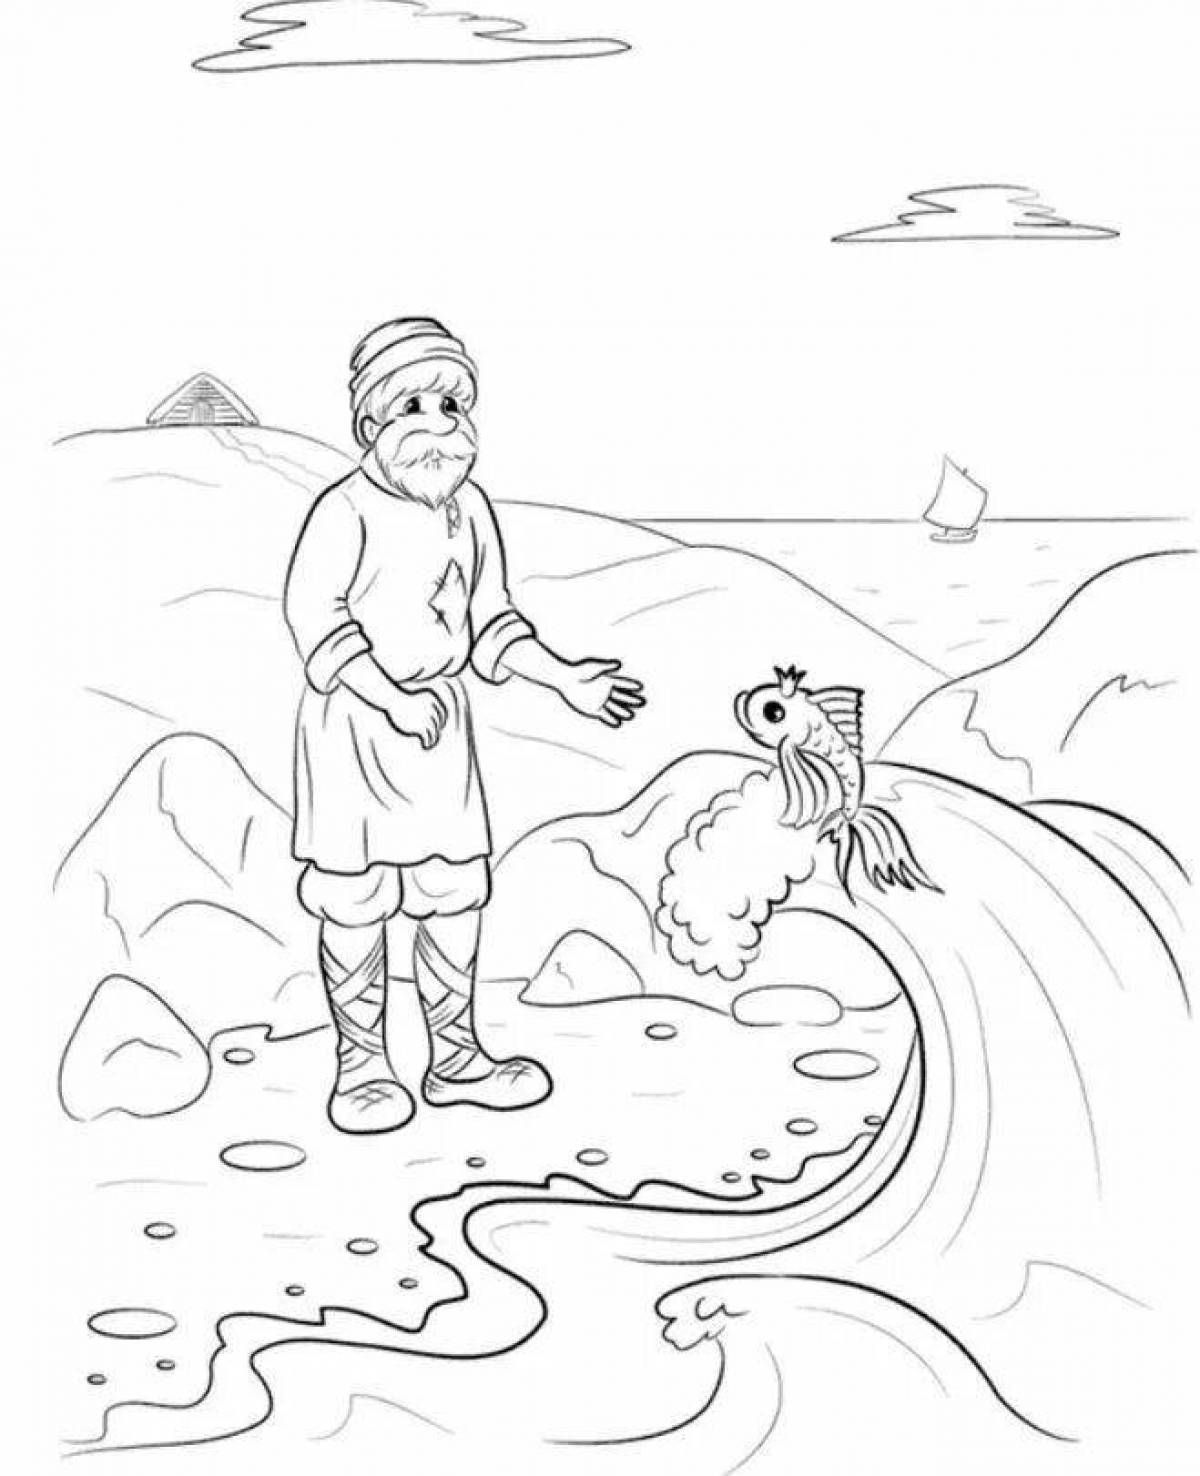 Splendorous golden fish story coloring page